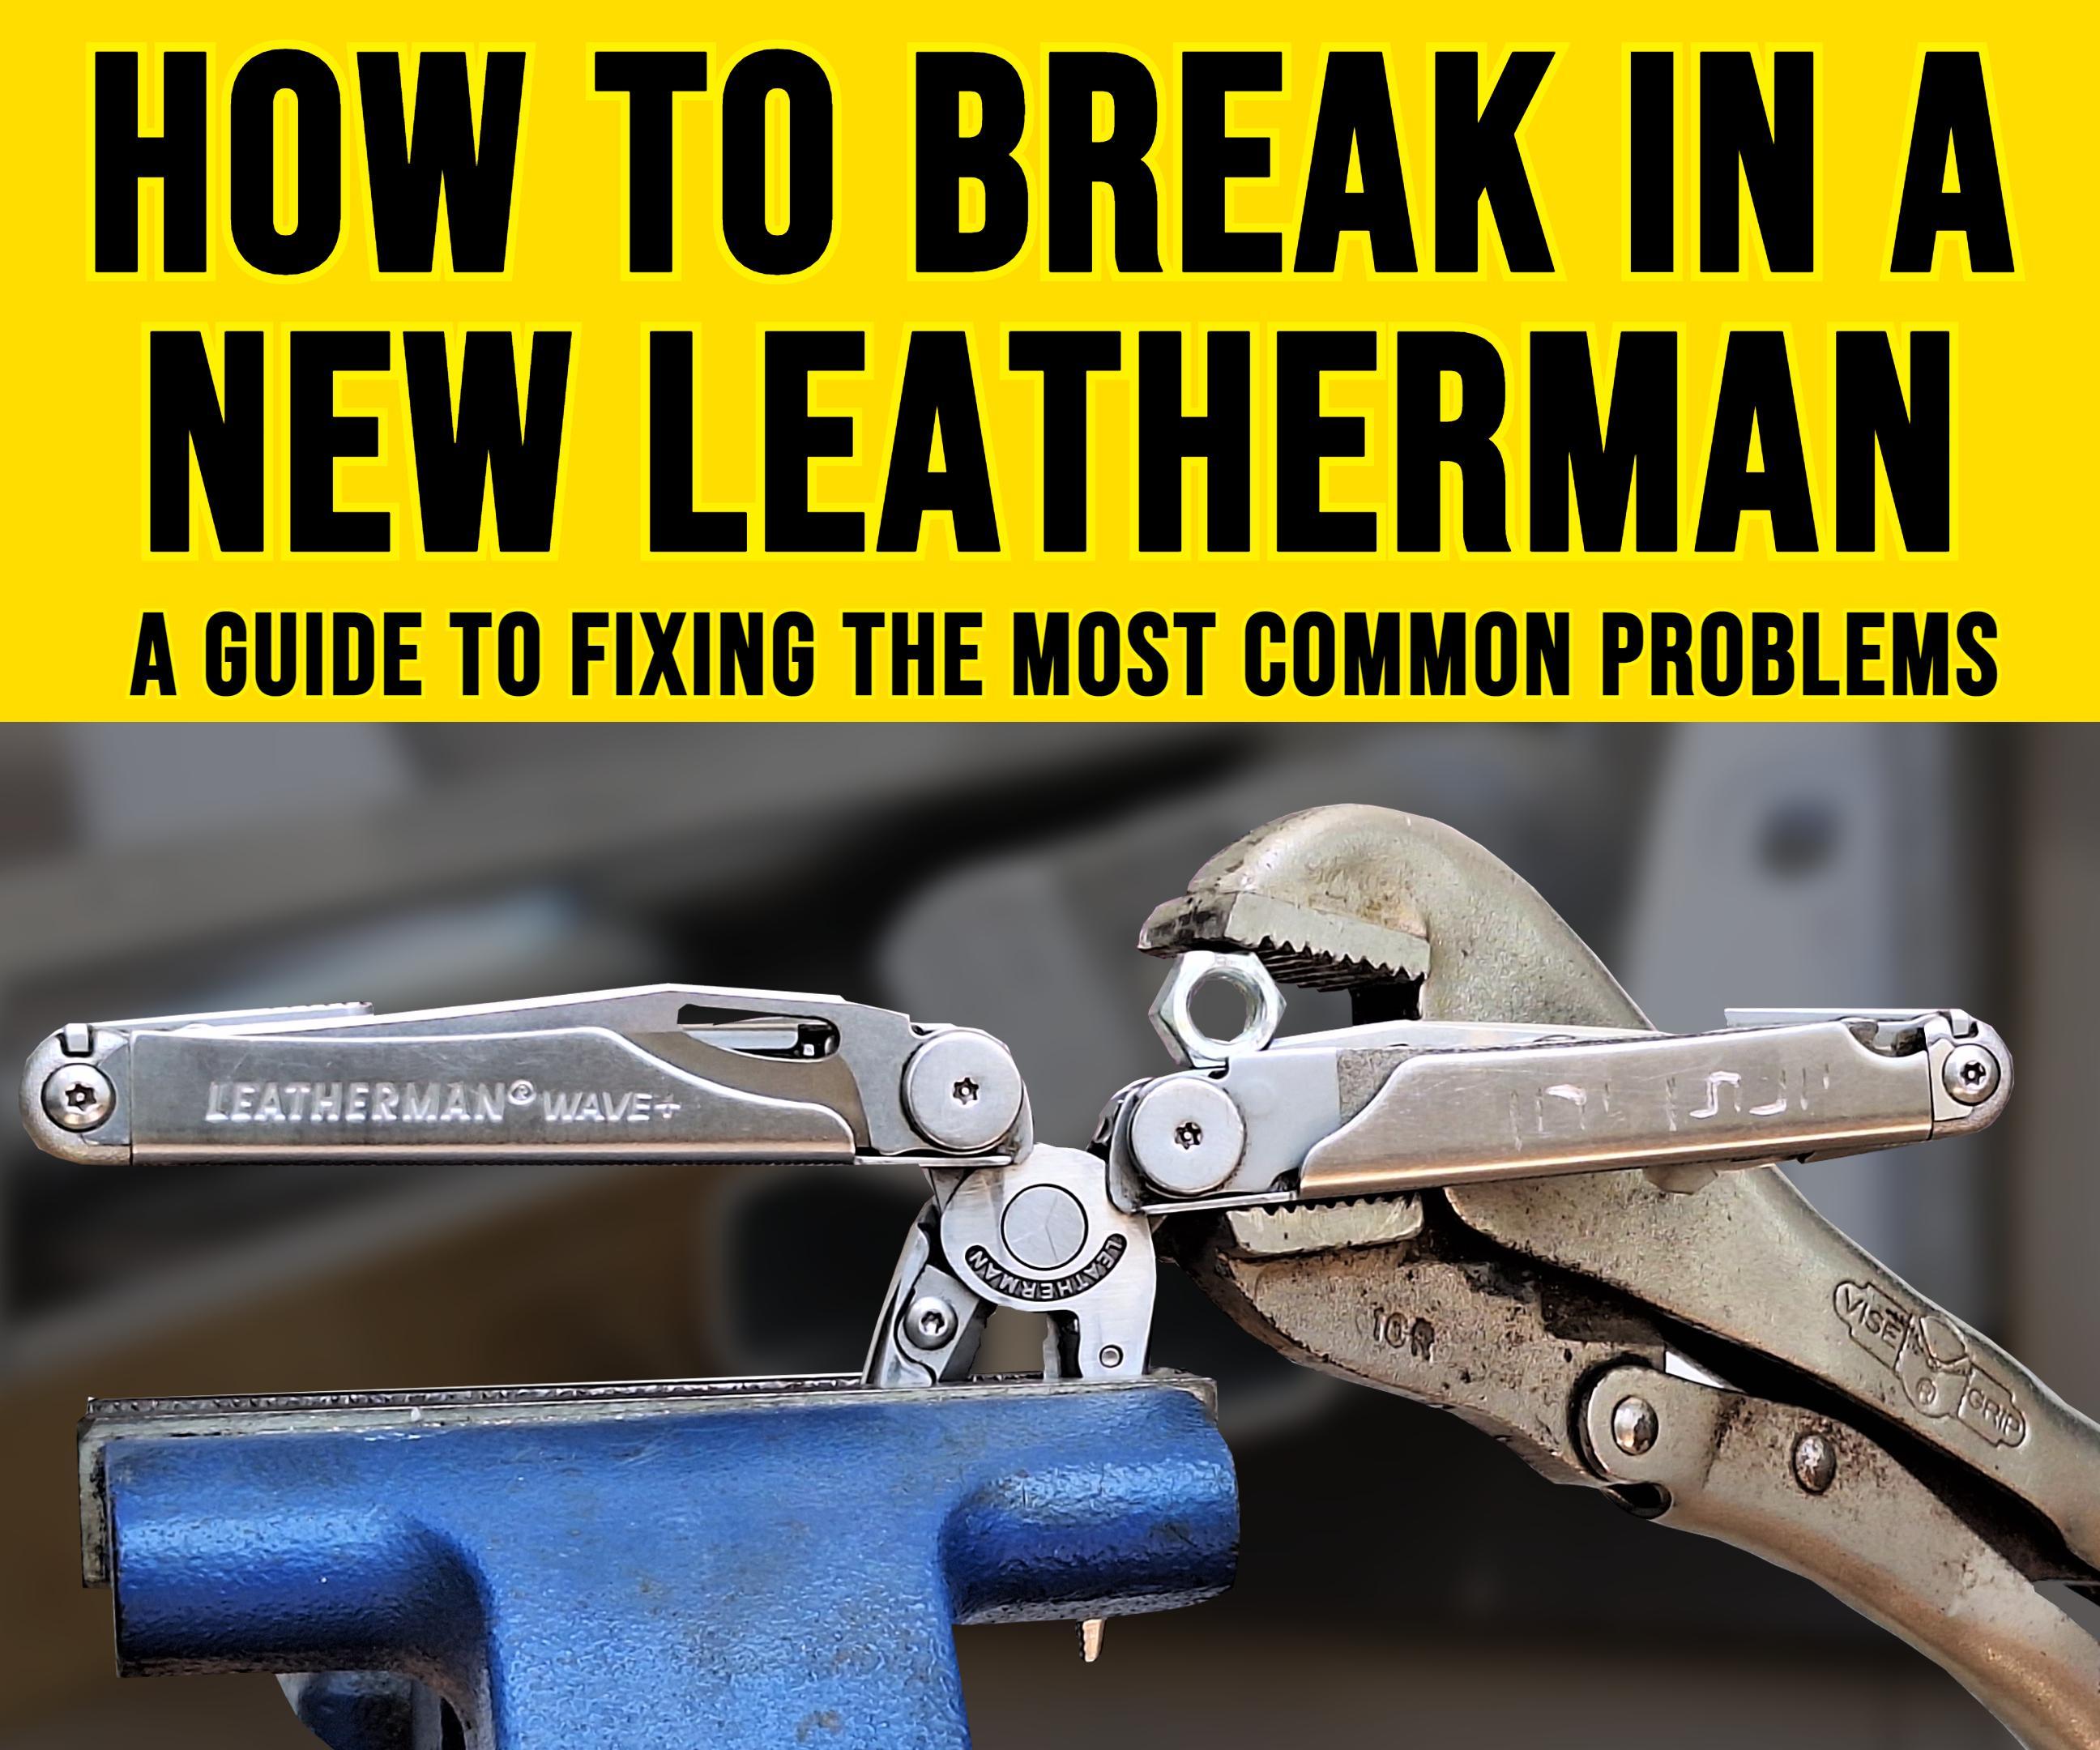 How to Break in a Leatherman: Stuck Pliers, Loose Handles, Jammed Blades & More Tips